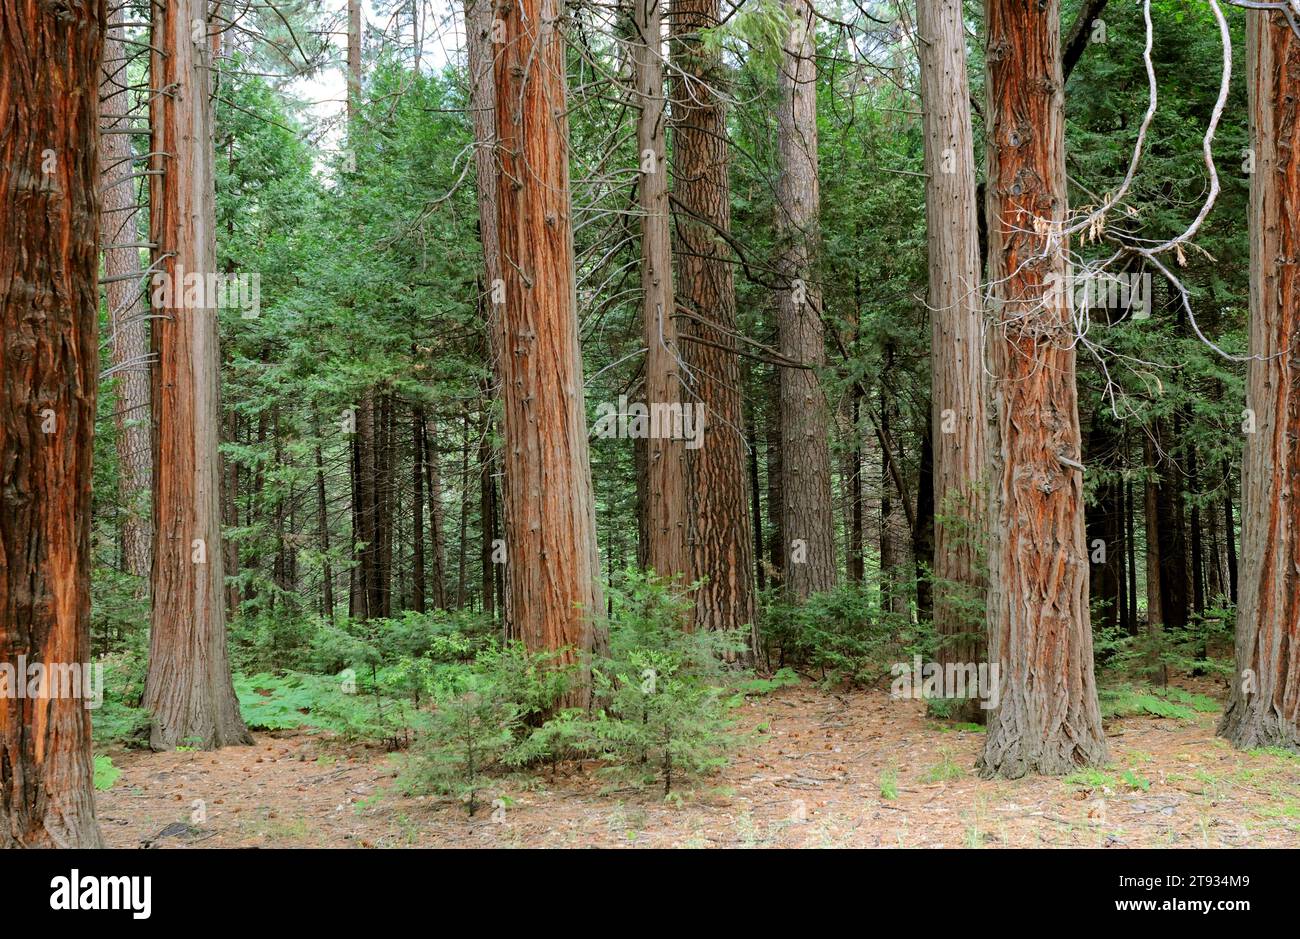 California incense cedar (Calocedrus decurrens or Libocedrus decurrens) is a conifer tree native from northwest Mexico and western USA to Oregon. This Stock Photo